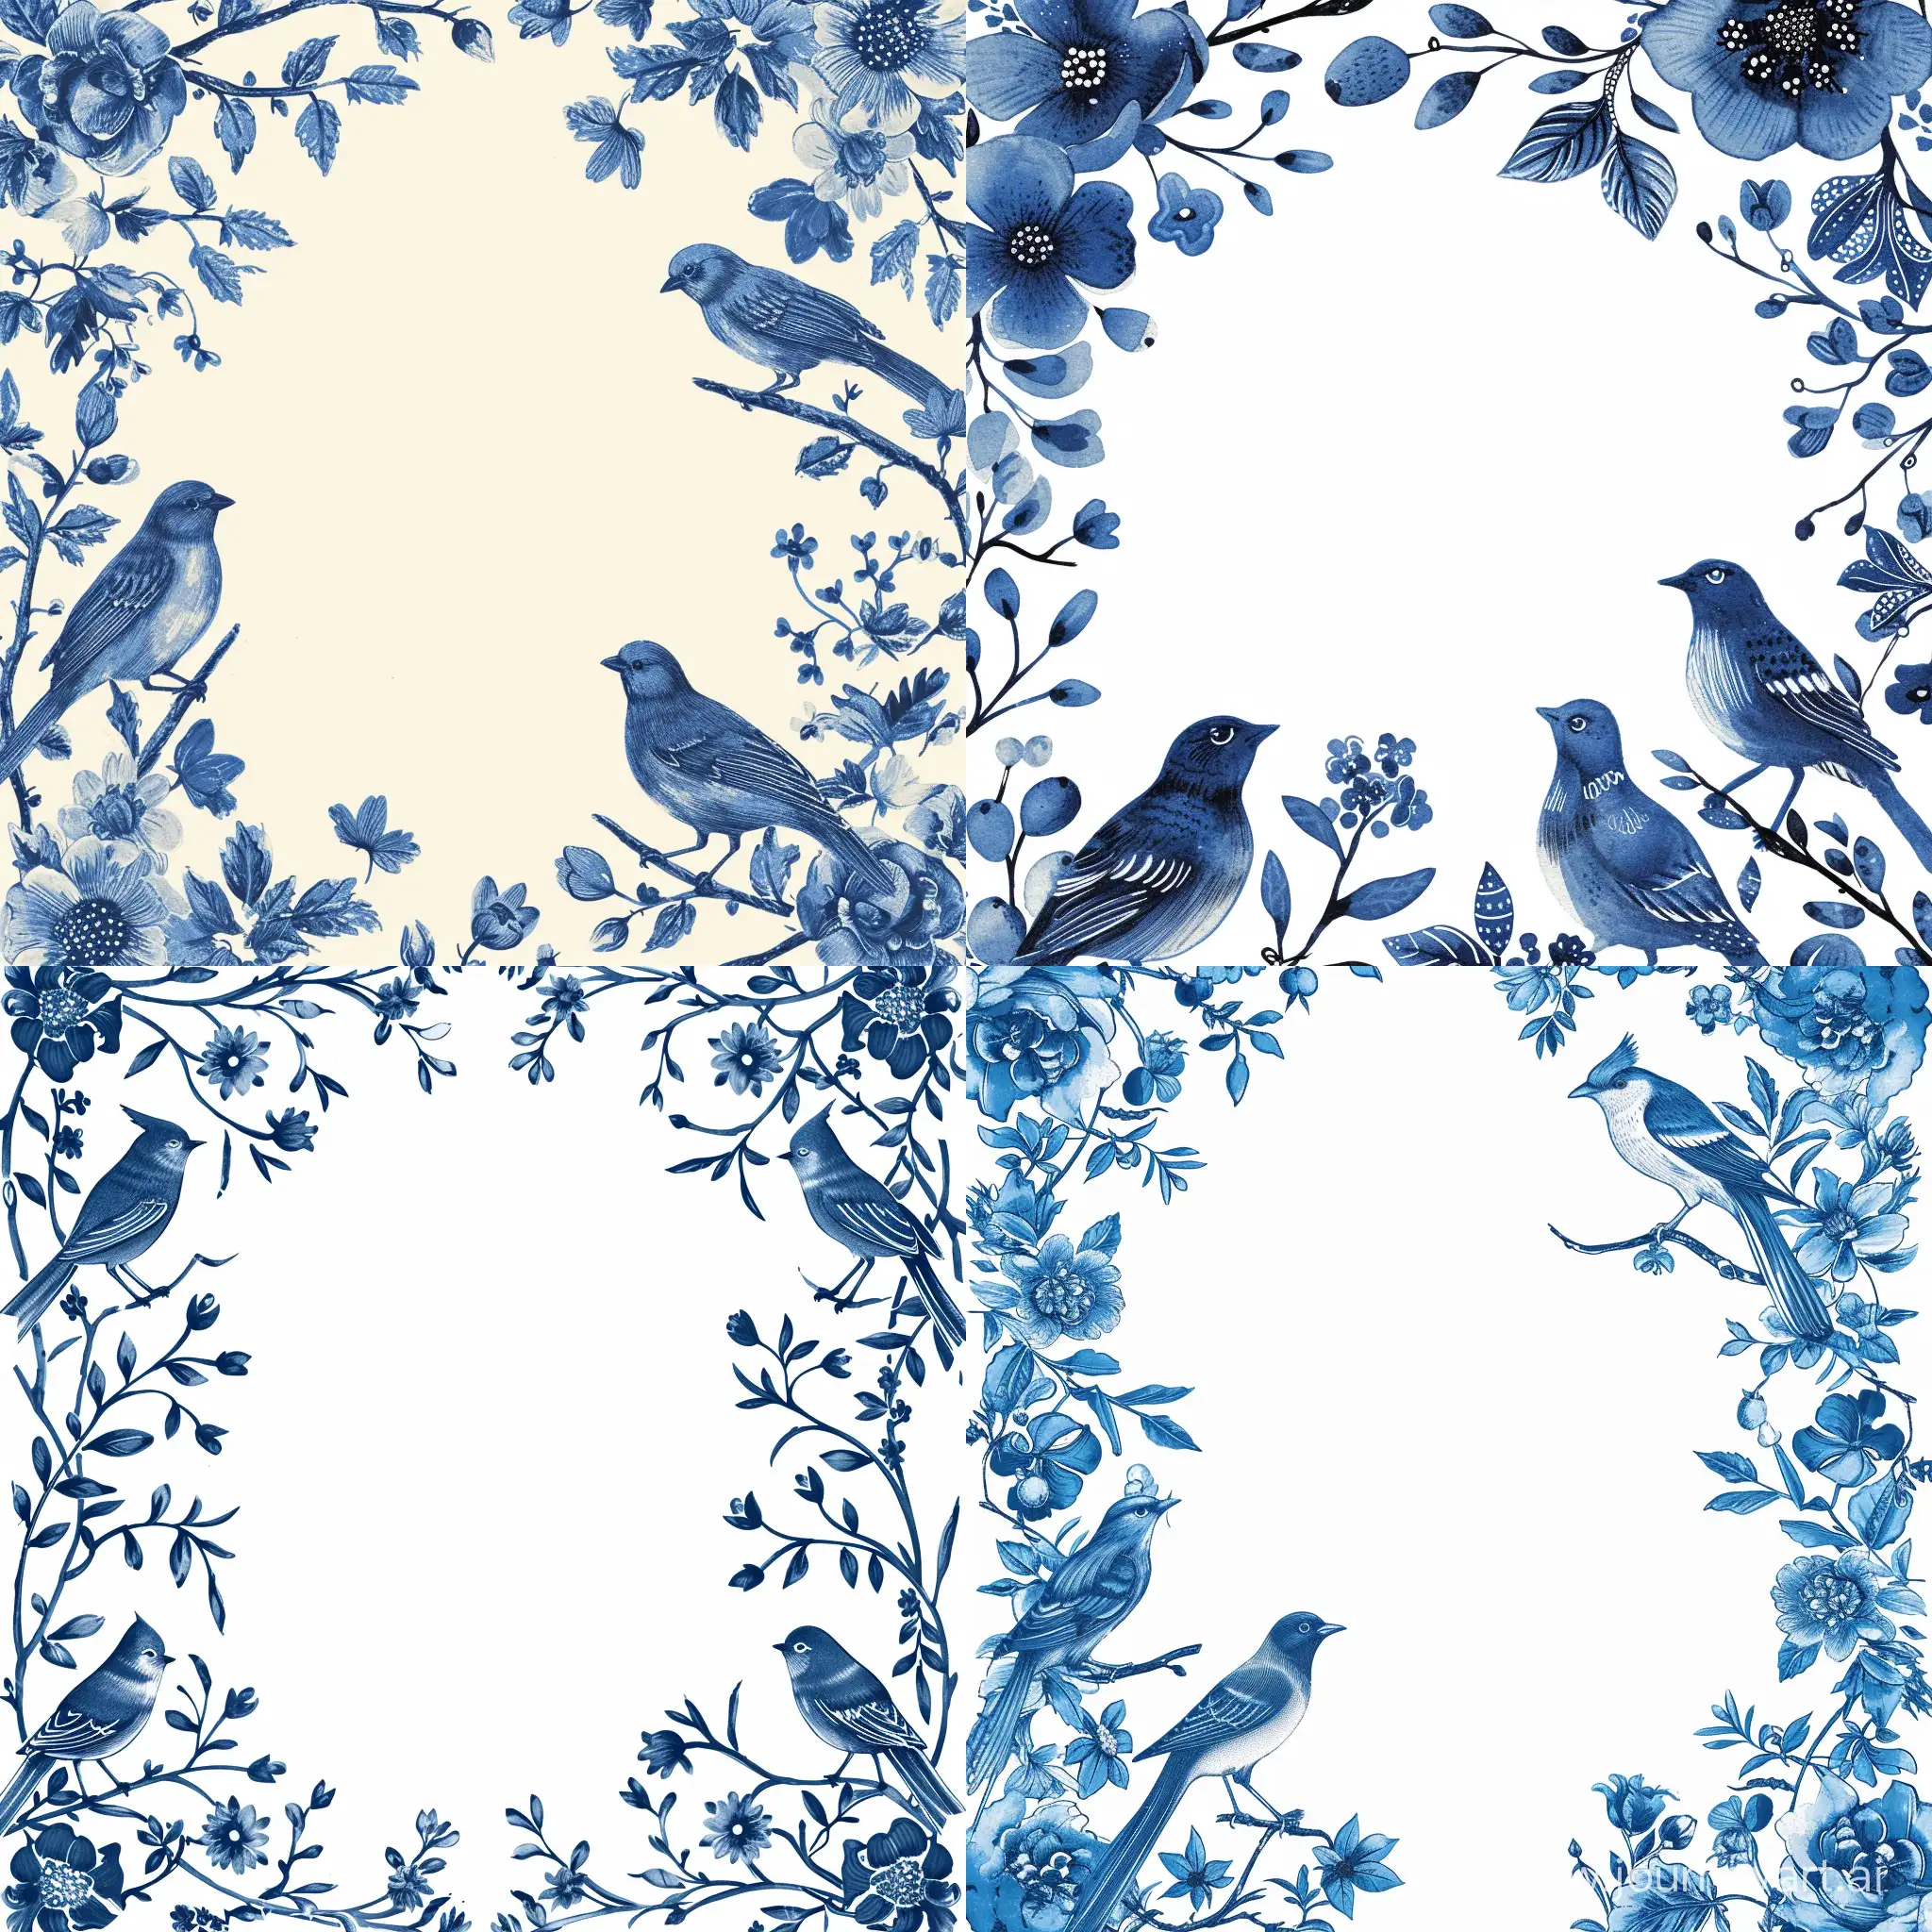 Elegant-Blue-Chinoiserie-Wedding-Invitation-with-Birds-and-Florals